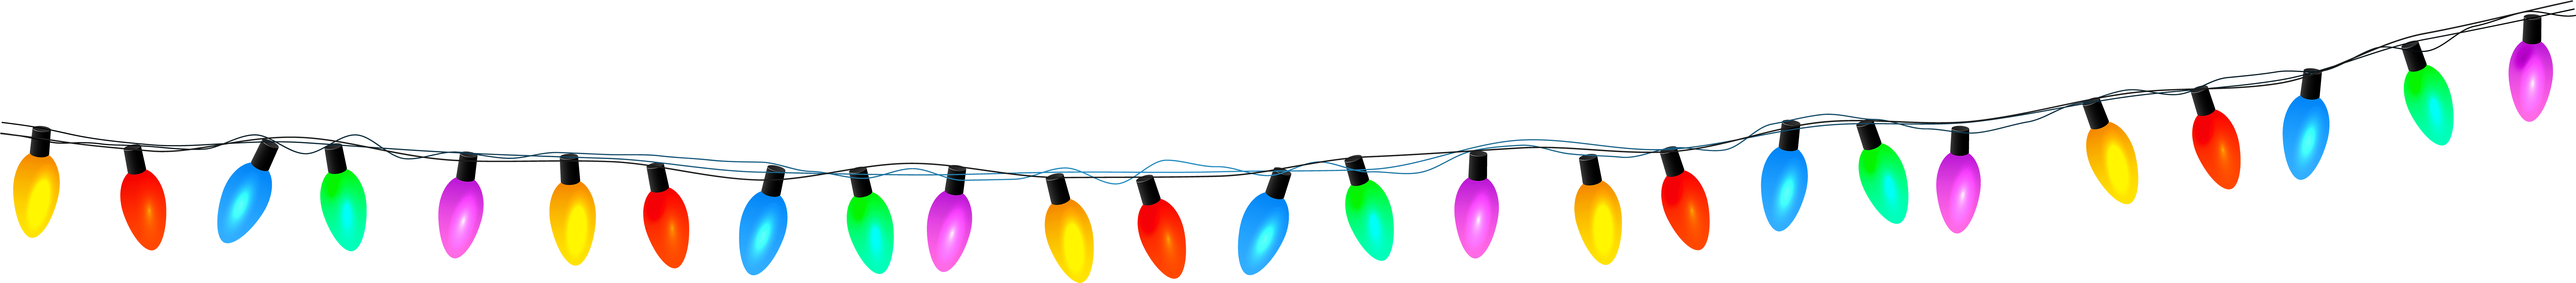 Christmas Lights String Clipart 5 By Kenneth - Christmas Light Transparent (8000x988)